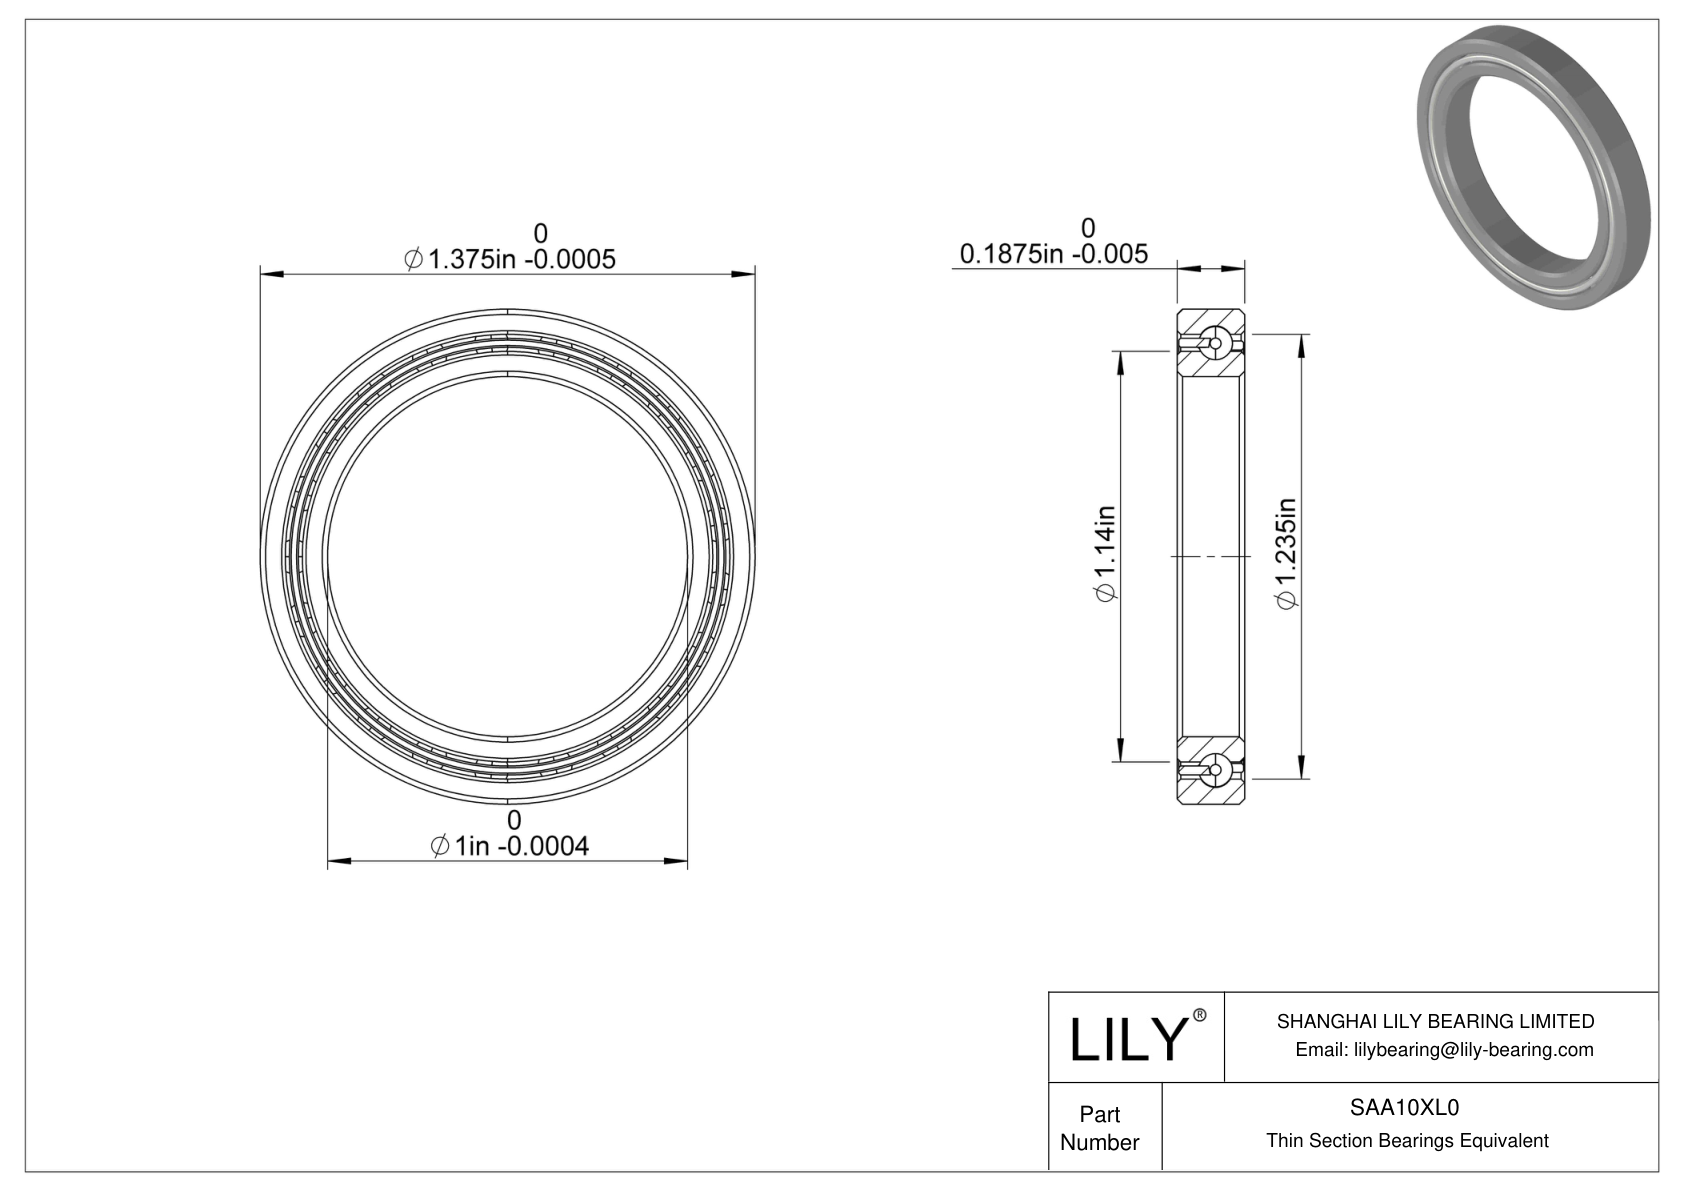 SAA10XL0 Constant Section (CS) Bearings CAD图形